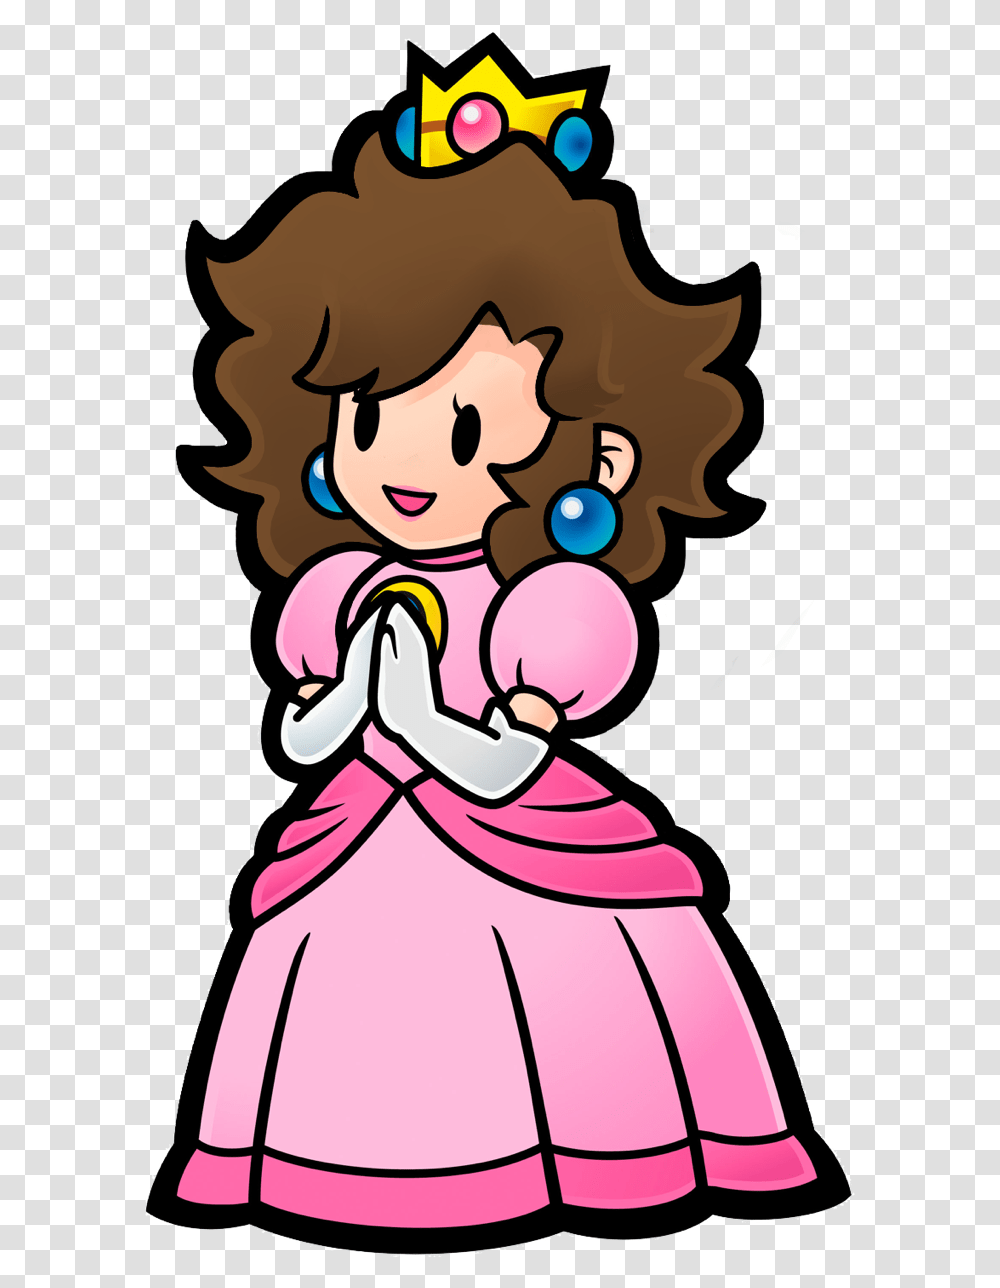 Please Don't Pay Attention To The Crust Along The Edges Princess Peach Paper Mario, Performer, Female Transparent Png